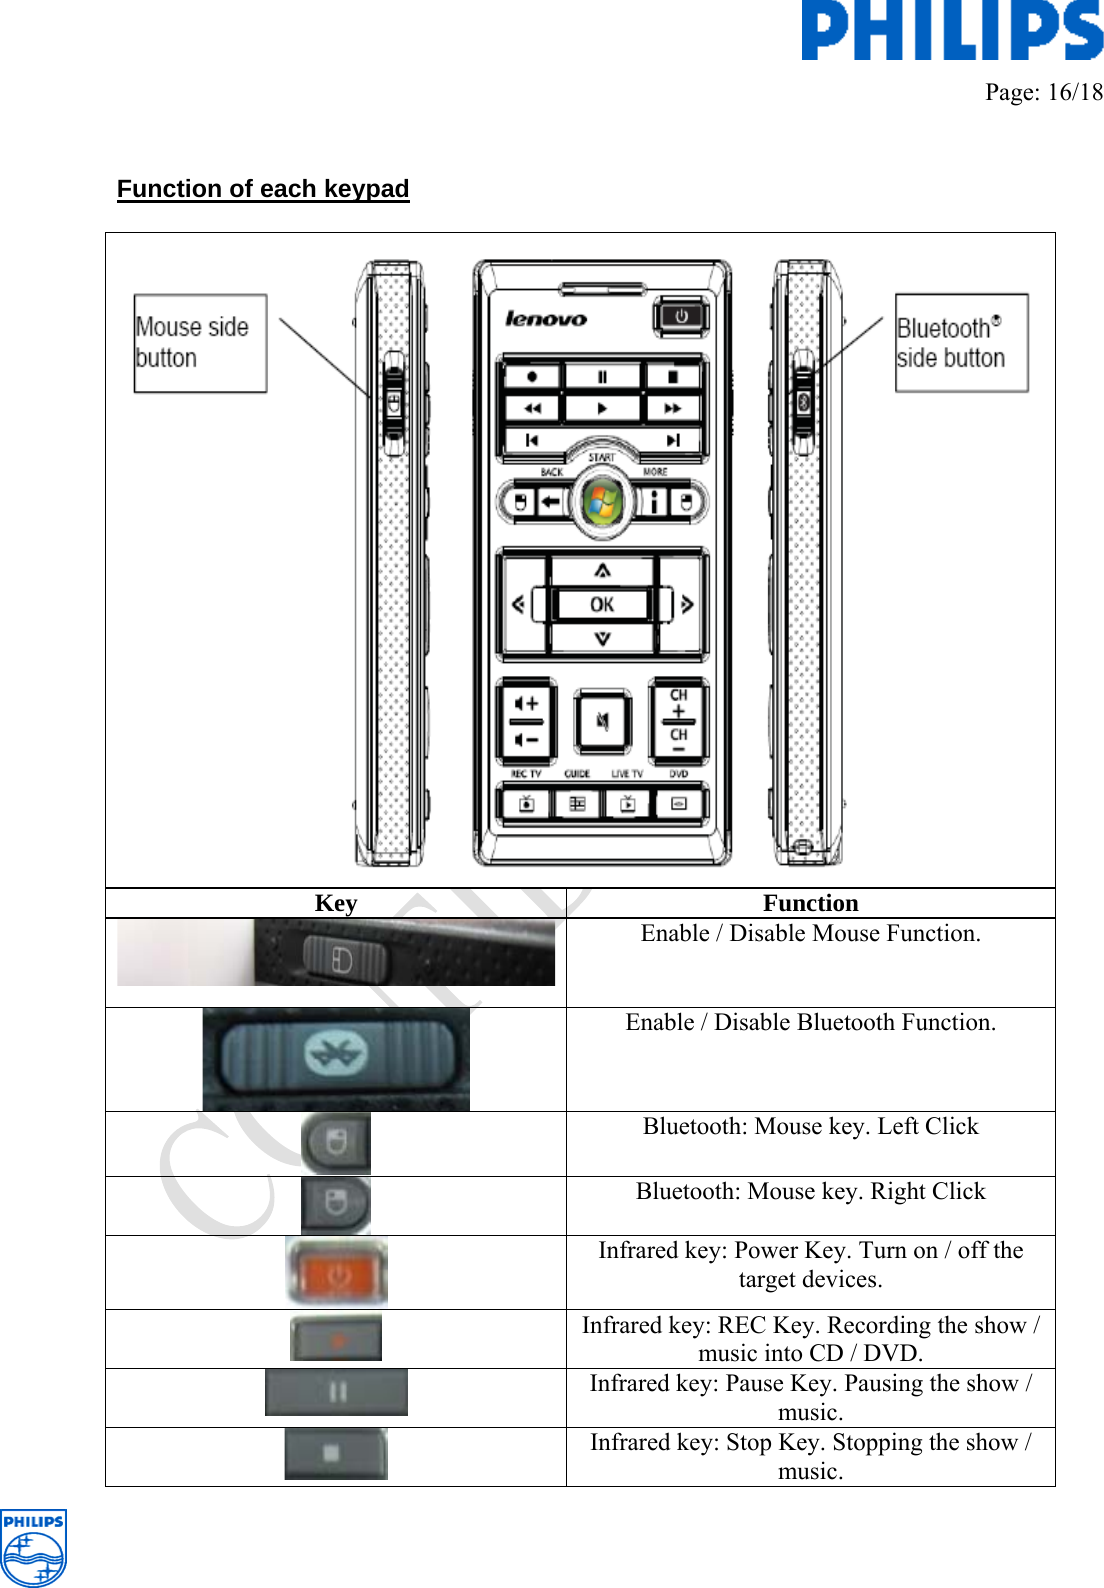         Page: 16/18    Function of each keypad  Key Function Enable / Disable Mouse Function. Enable / Disable Bluetooth Function.  Bluetooth: Mouse key. Left Click  Bluetooth: Mouse key. Right Click  Infrared key: Power Key. Turn on / off the target devices.  Infrared key: REC Key. Recording the show / music into CD / DVD.  Infrared key: Pause Key. Pausing the show / music.  Infrared key: Stop Key. Stopping the show / music. 